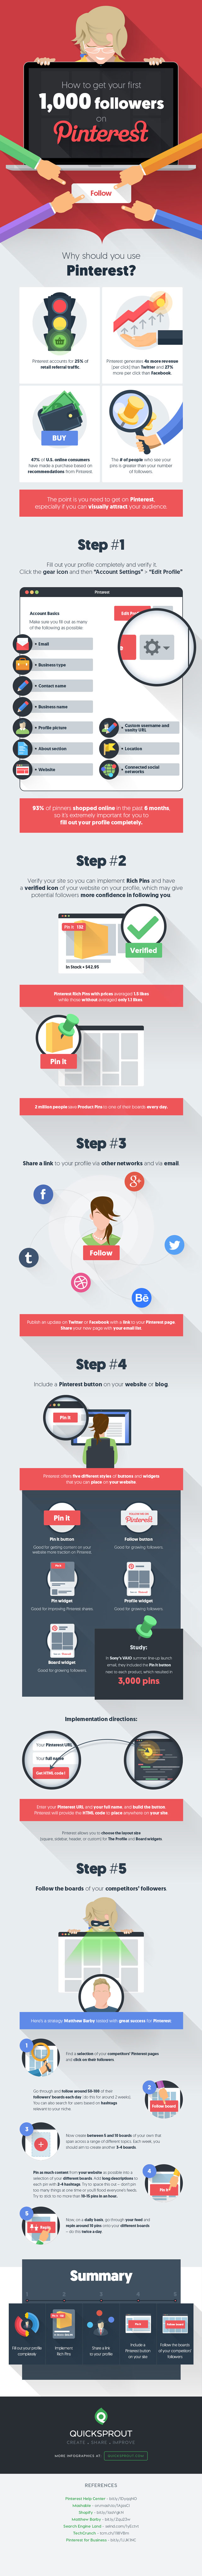 how to get followers on Pinterest infographic